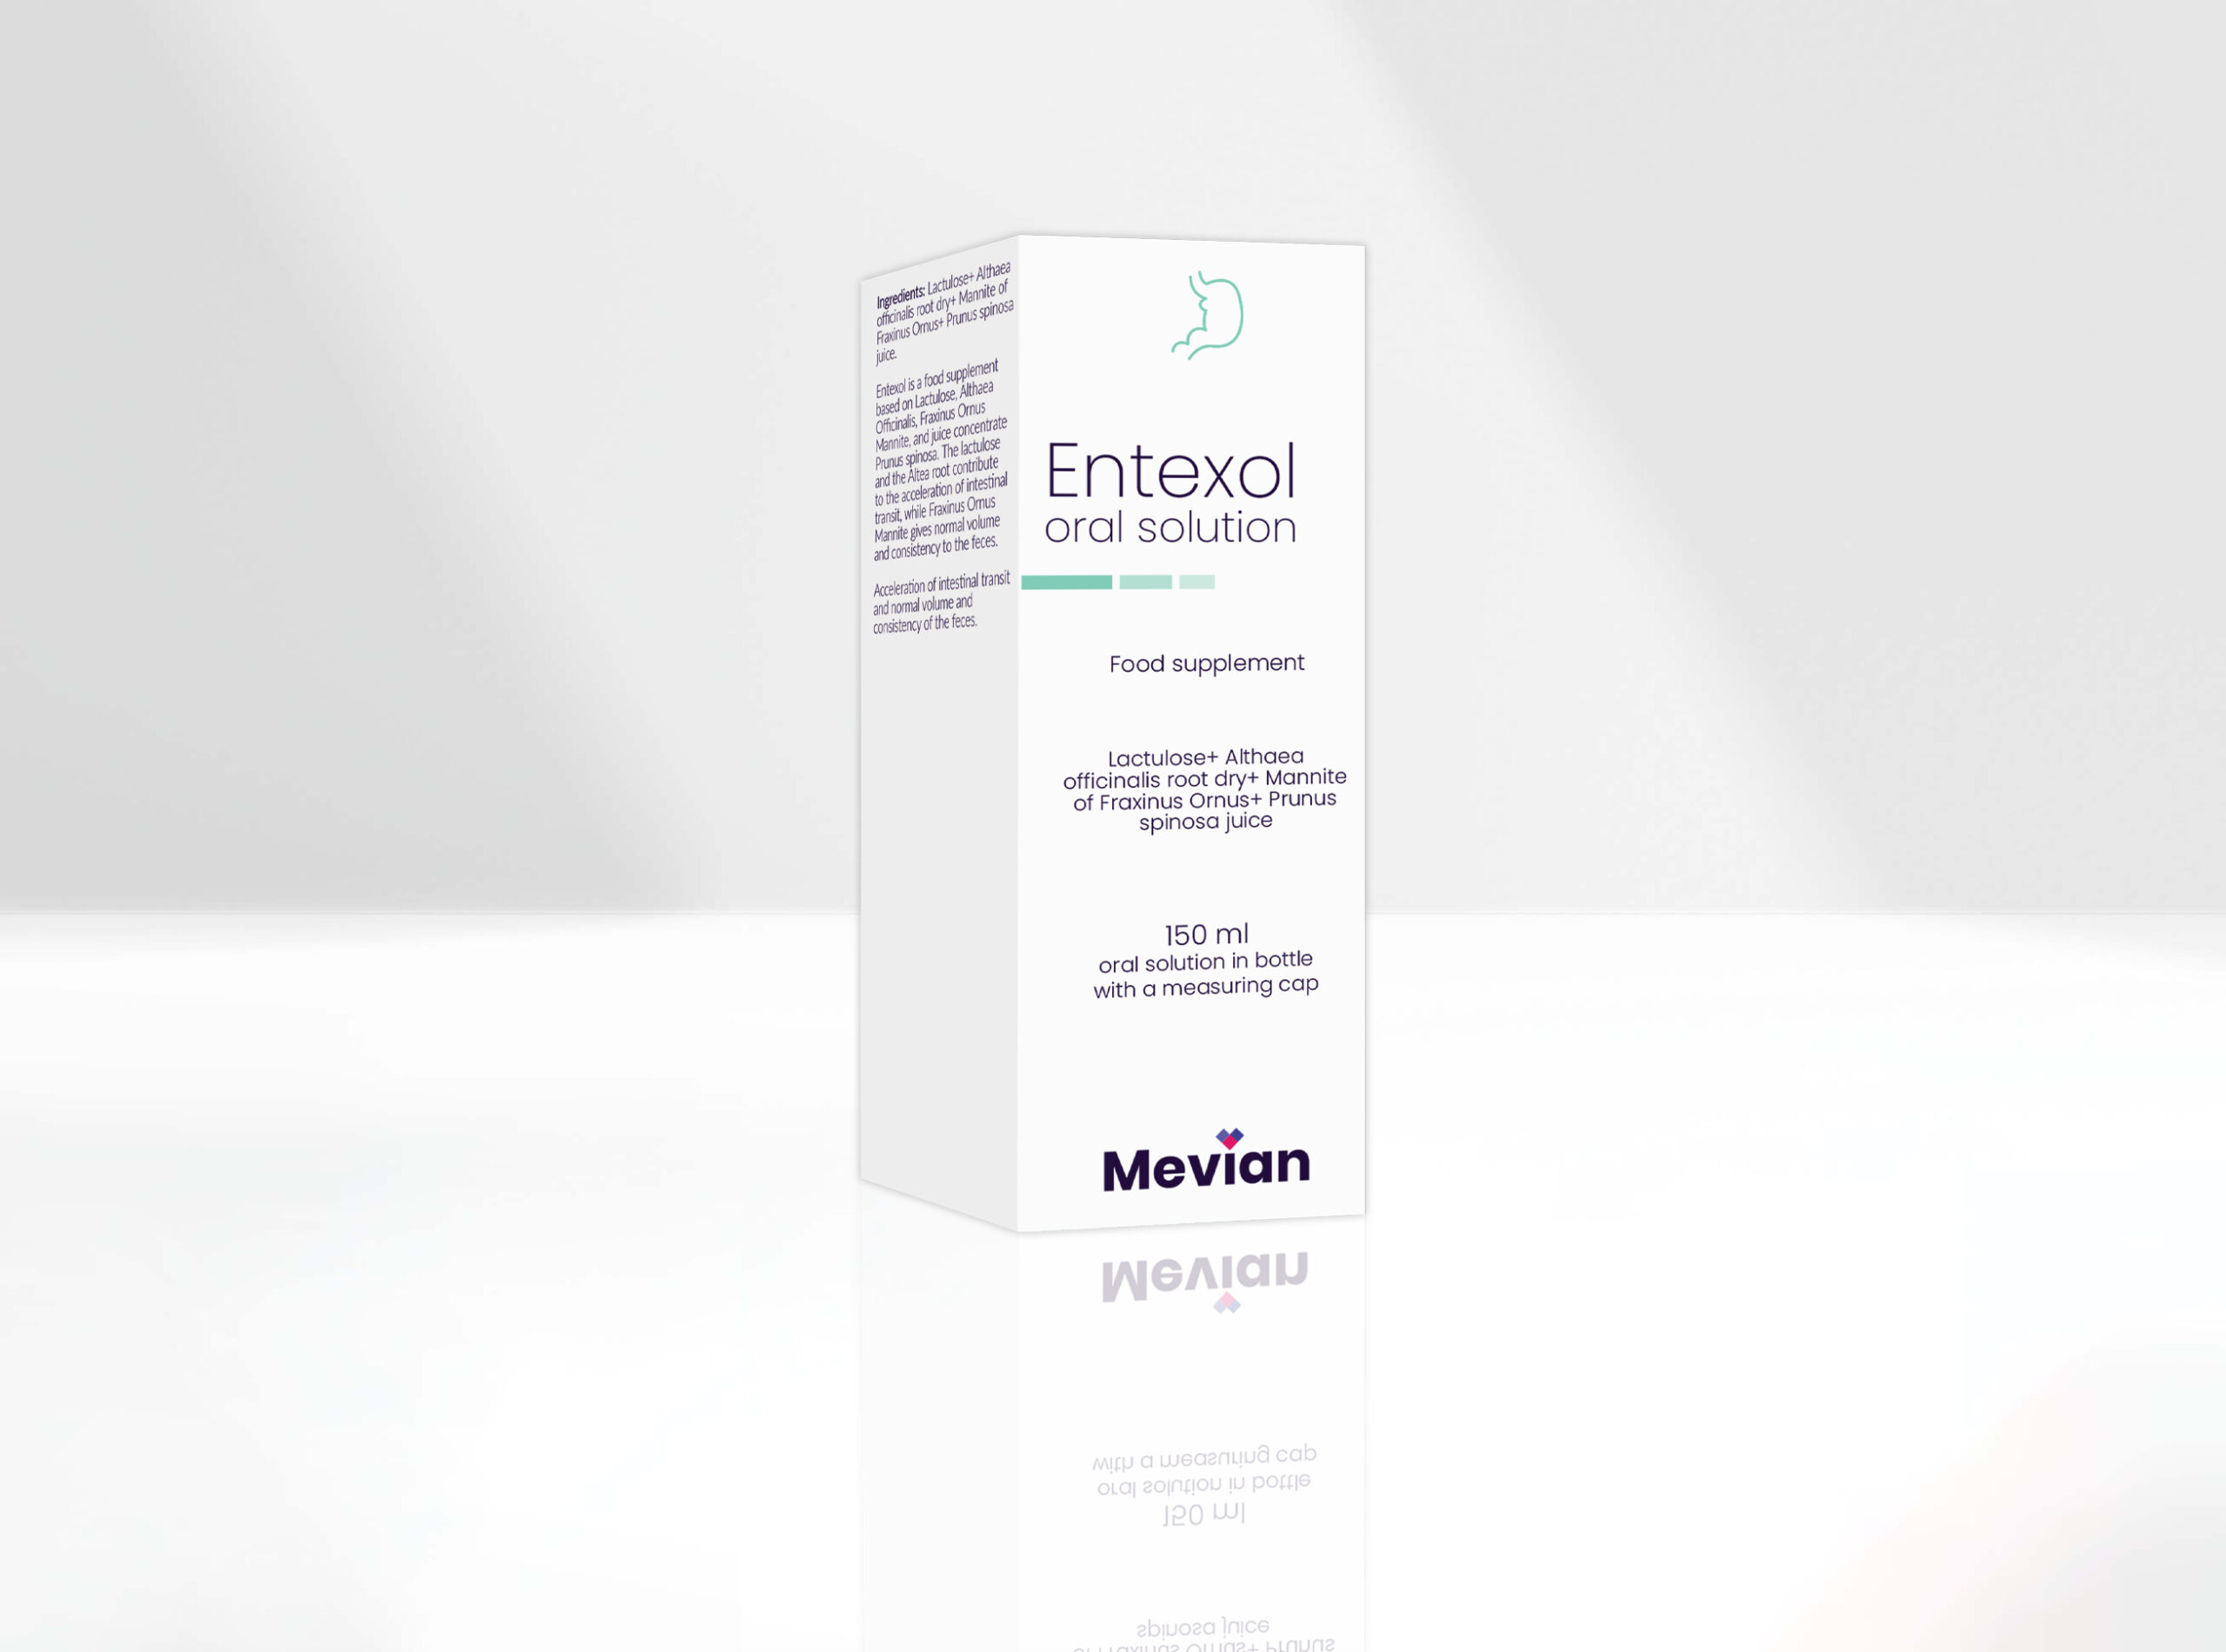 Entexol oral solution is a highly potent product that accelerates the intestinal transit and normal volume and consistency of the feces.